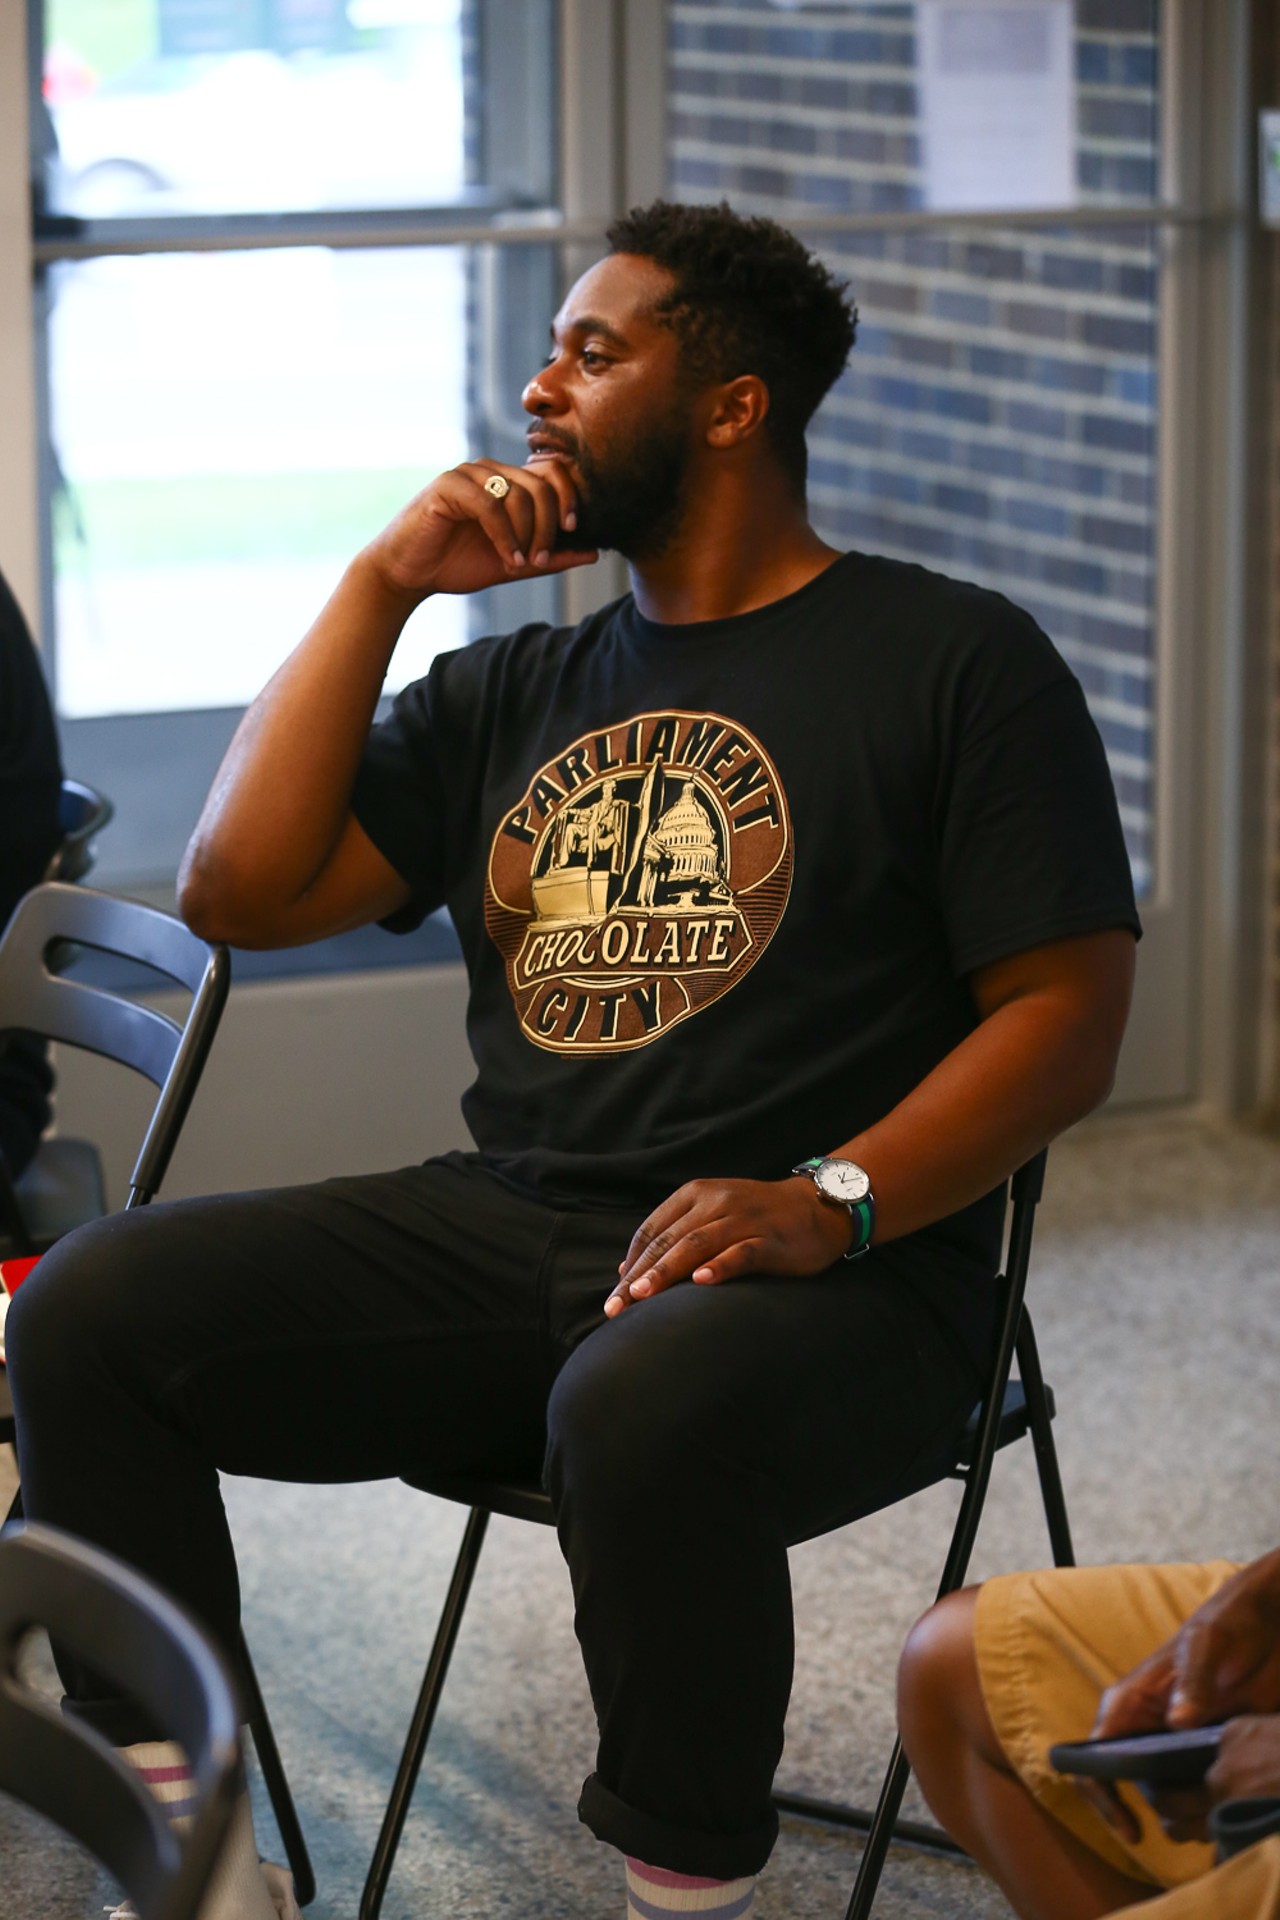 Everything We Saw at "You Must Learn: A Discussion About Cleveland's Hip-Hop Cultural History